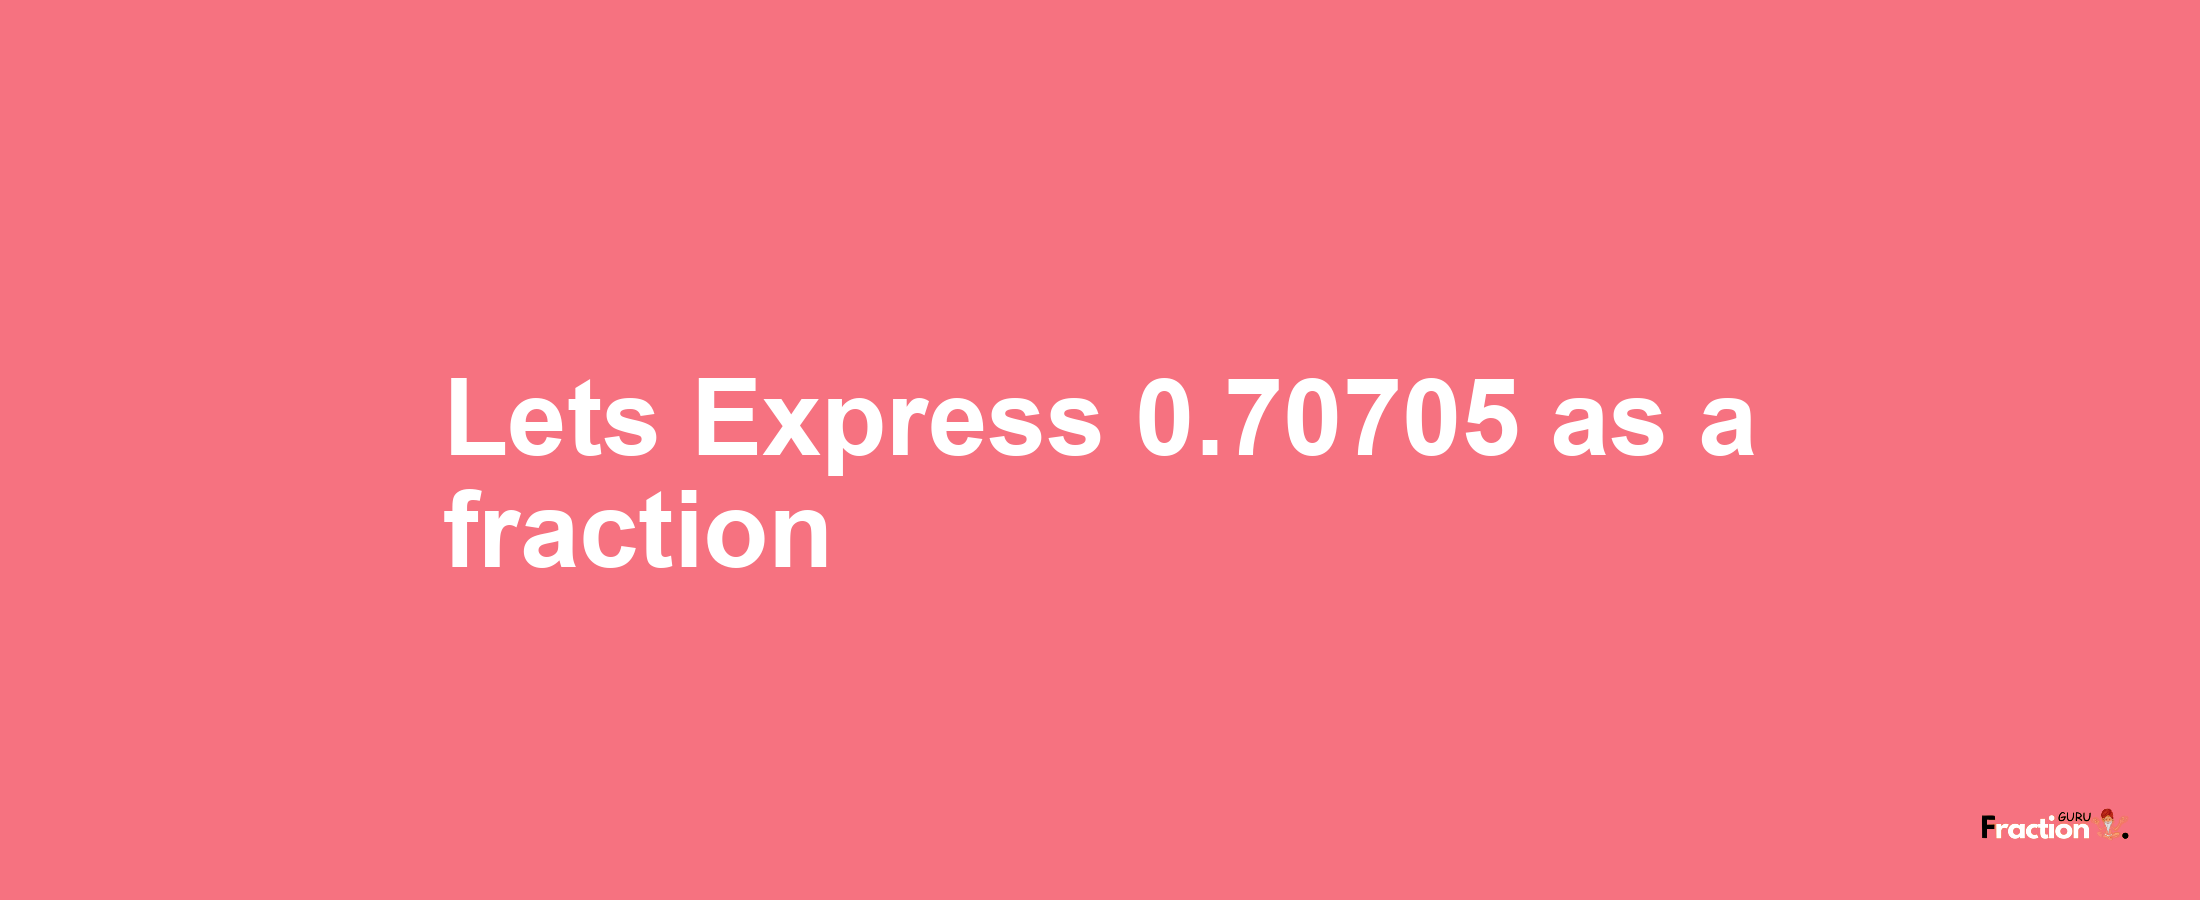 Lets Express 0.70705 as afraction